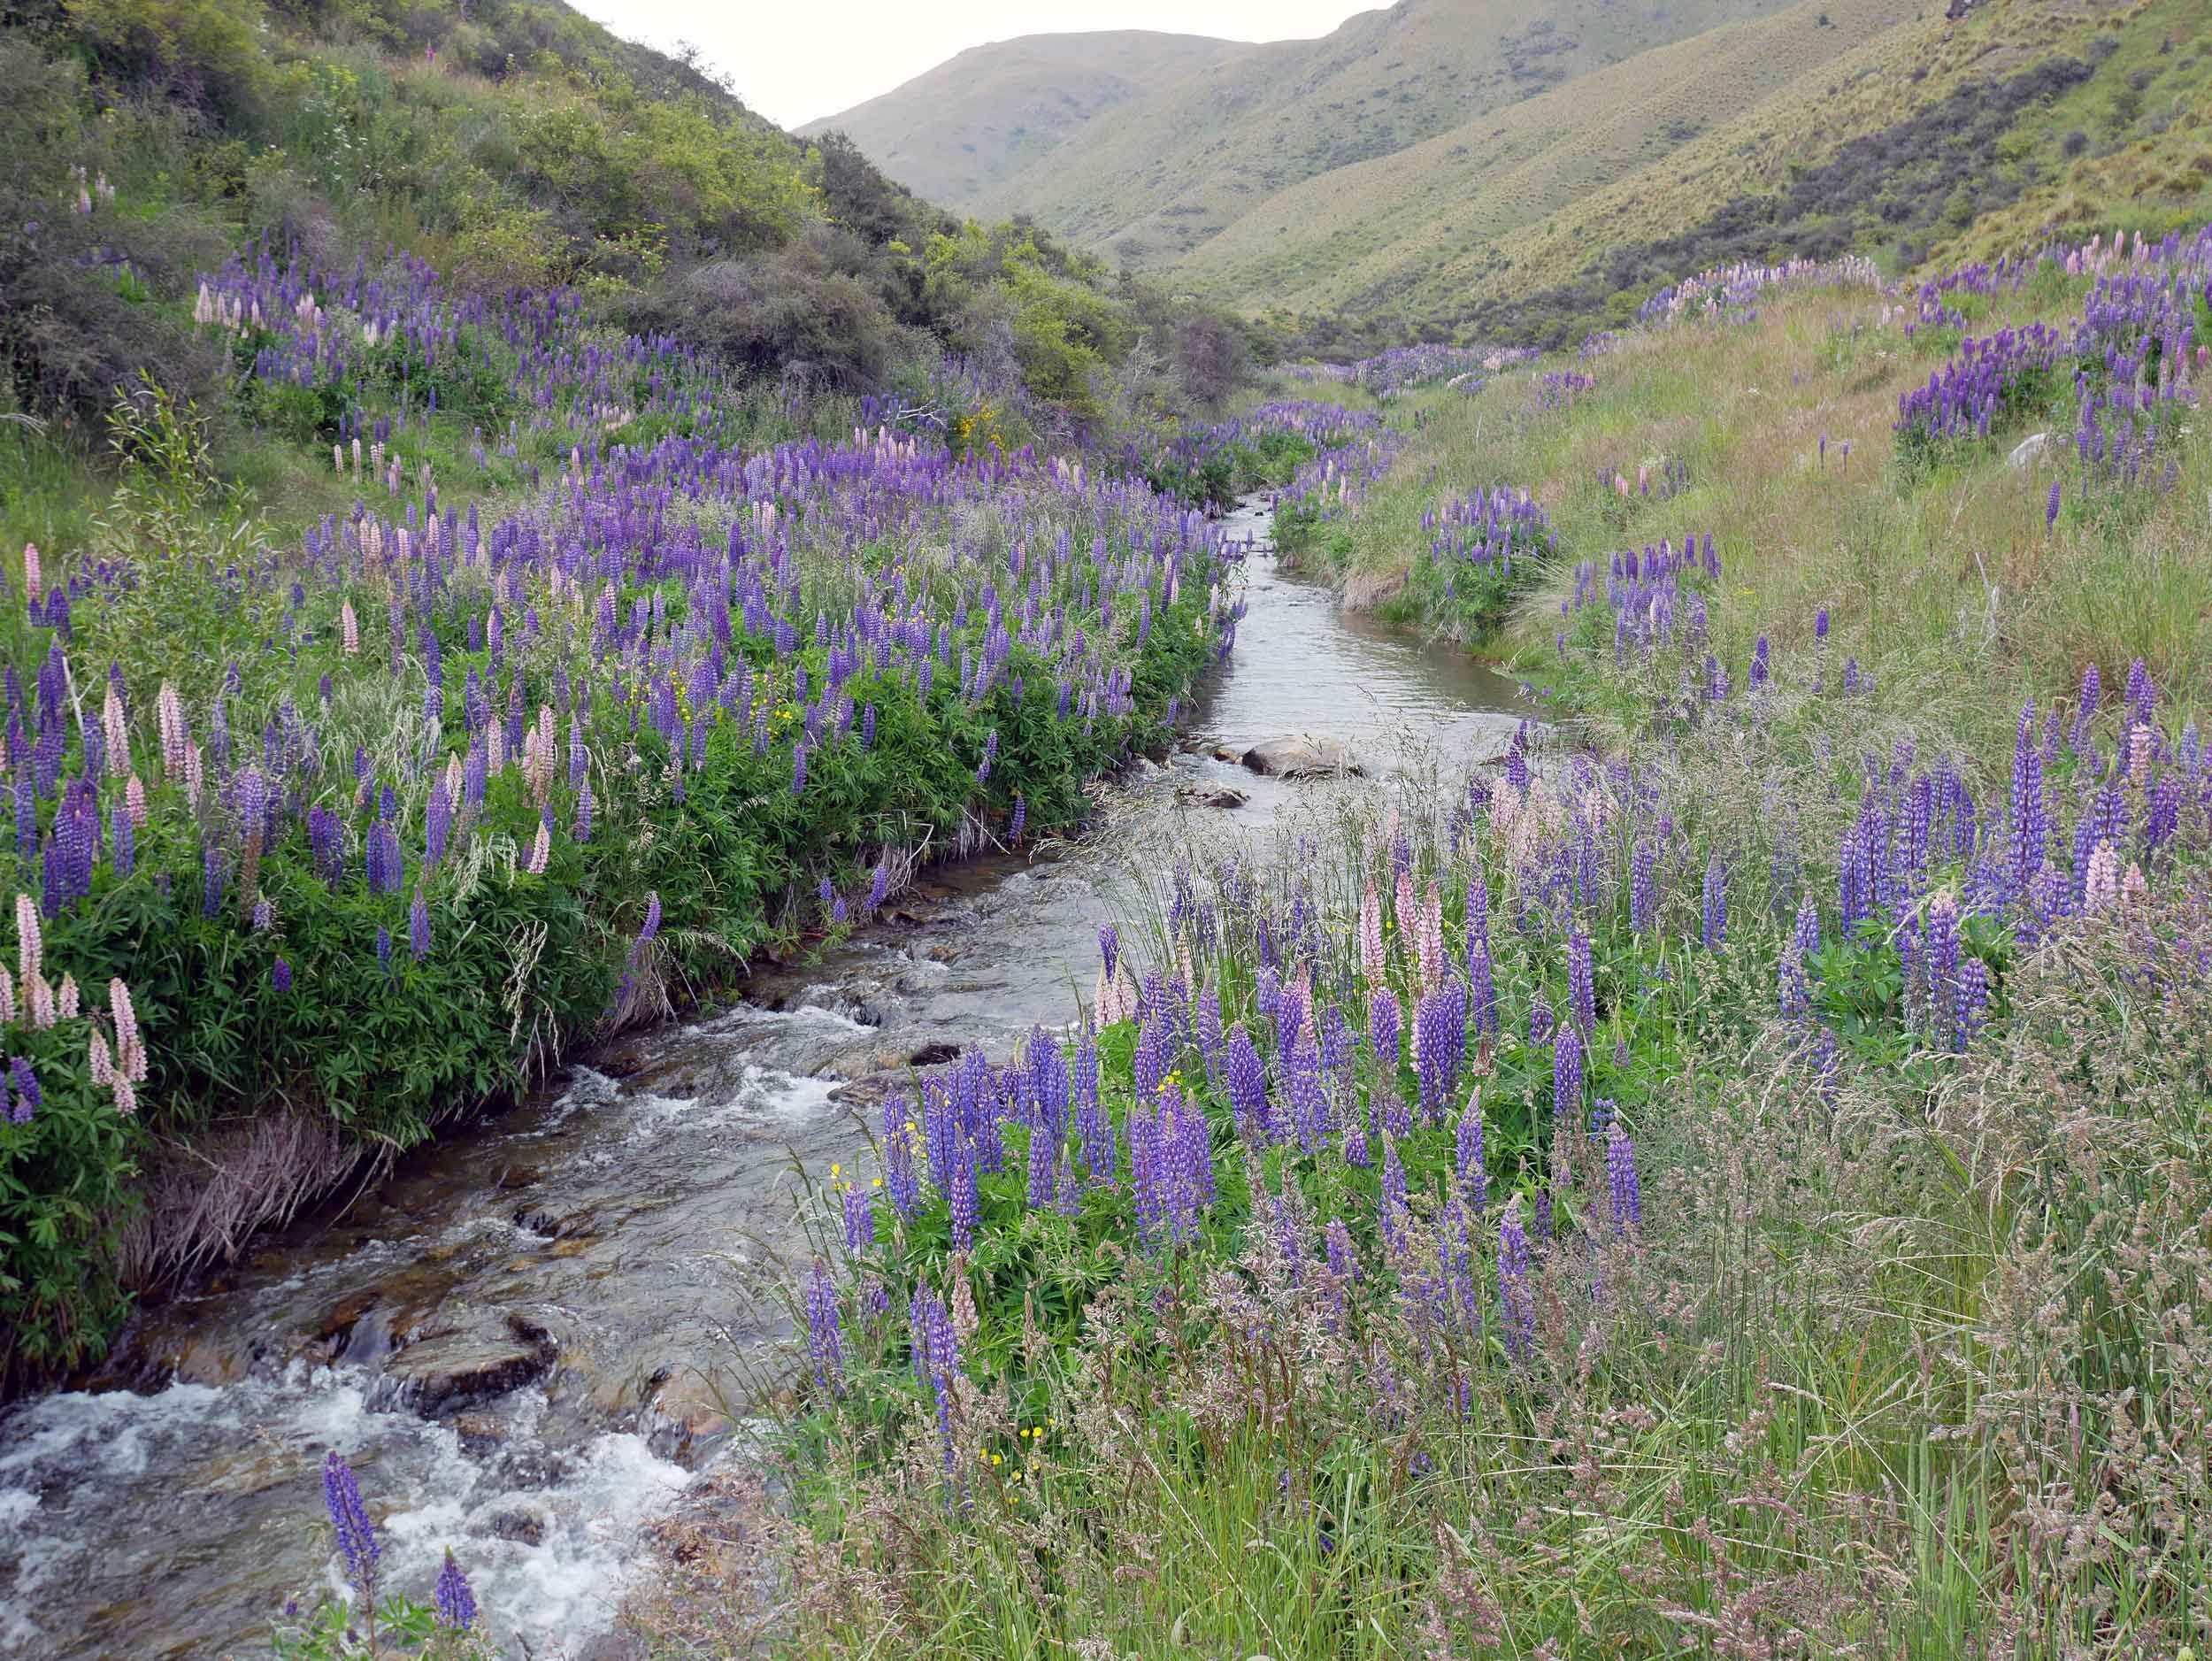  On our way to Milford Sound, we saw fields and fields of vibrant pinks, purples and blues of wild lupines (Jan 8).&nbsp; 